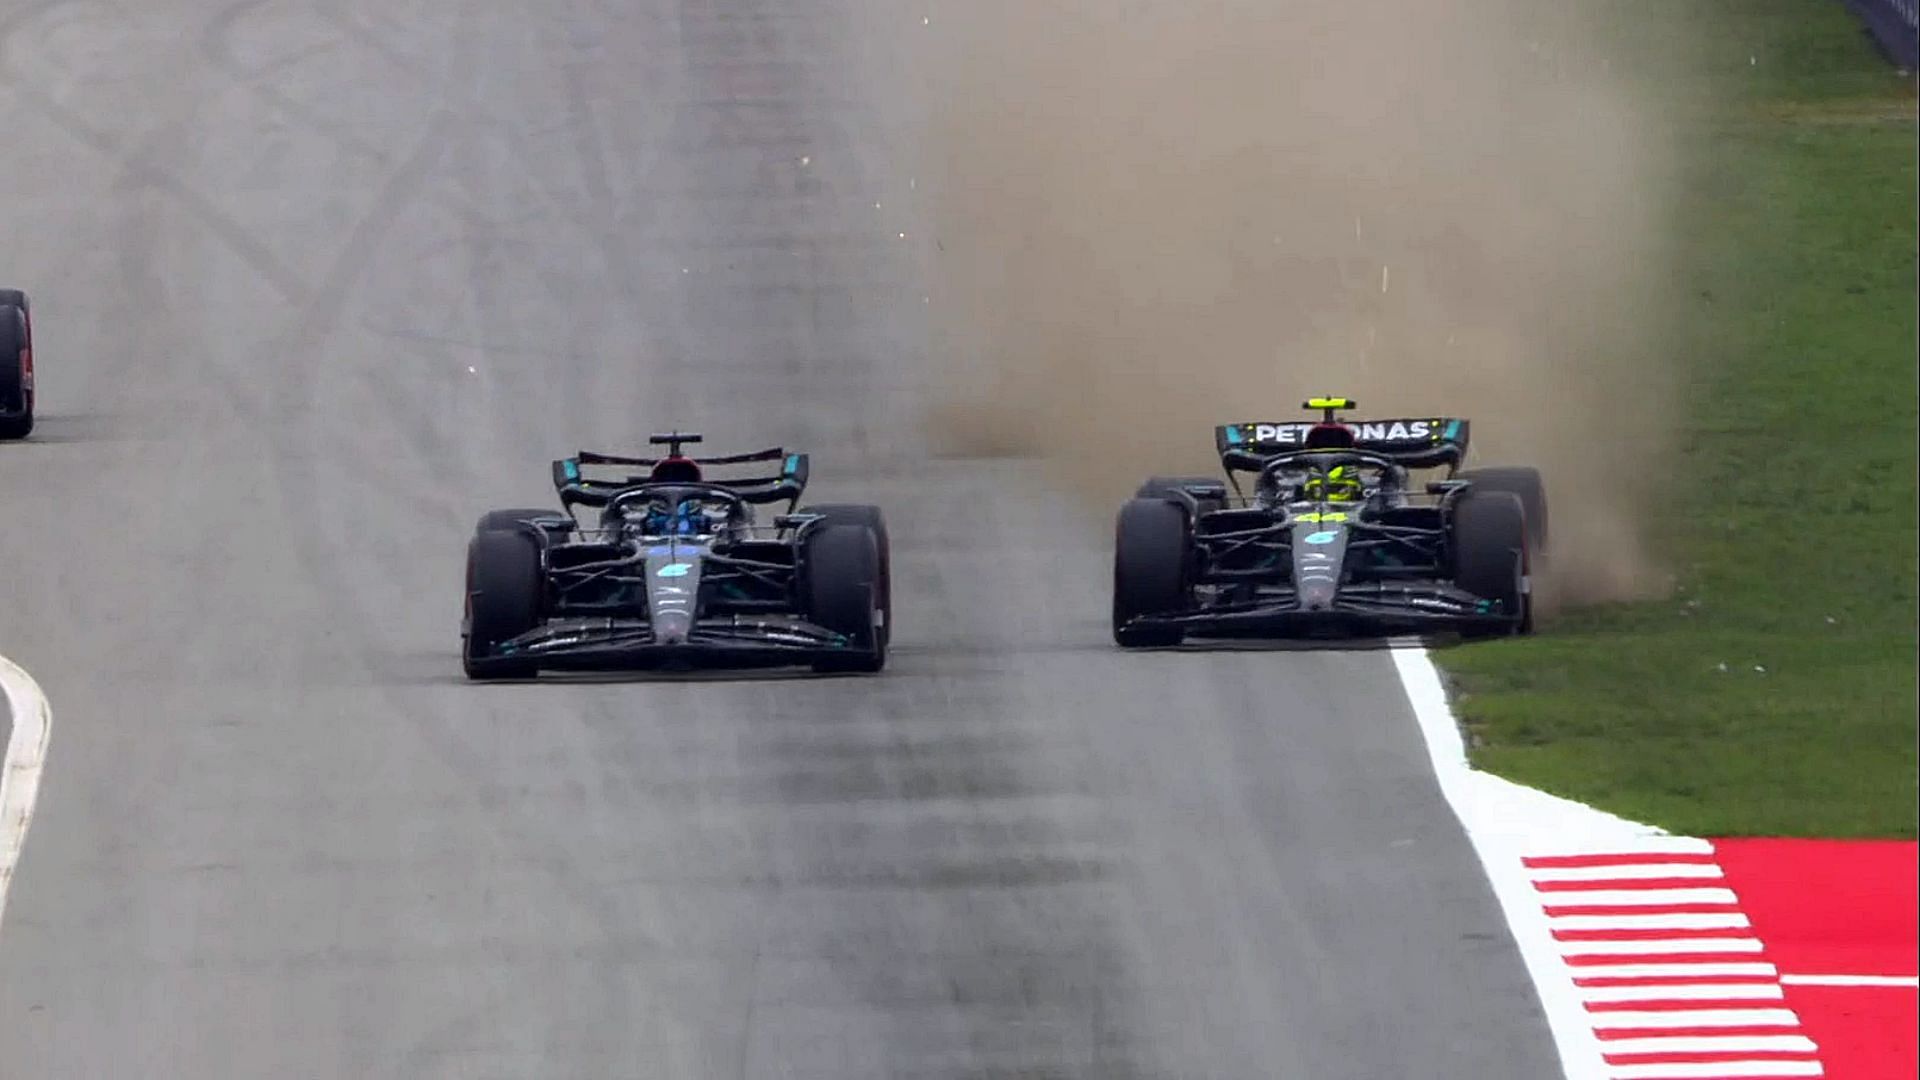 George Russell (63) and Lewis Hamilton (44) collide with each other during the qualifying session prior to the 2023 F1 Spanish GP (Image via Sportskeeda)